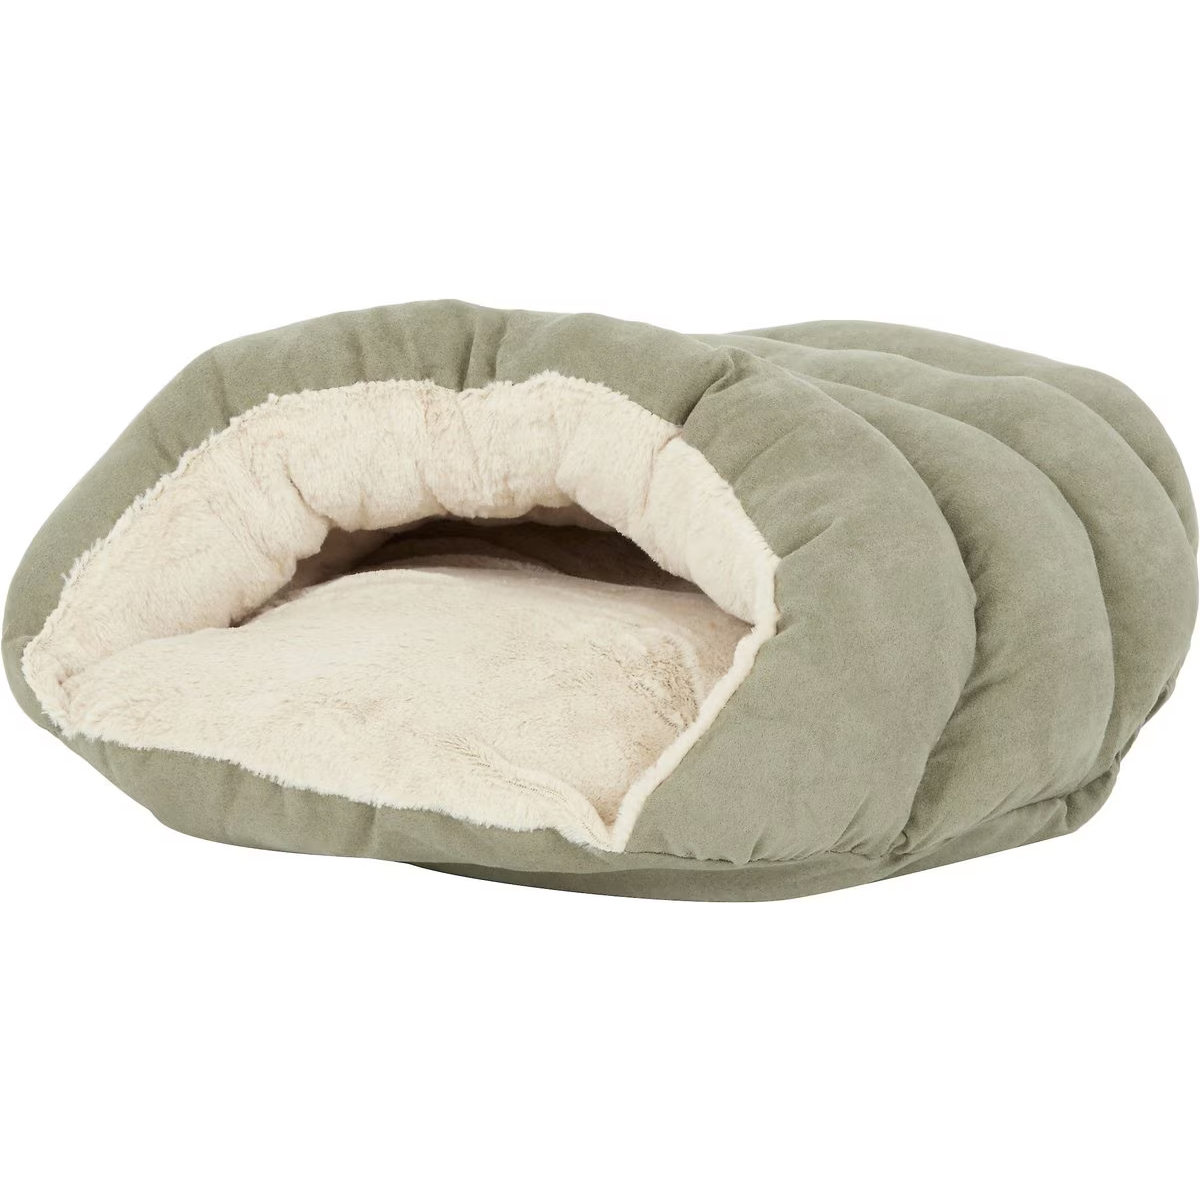 Ethical Pet Sleep Zone Cuddle Cave Cat Bed New